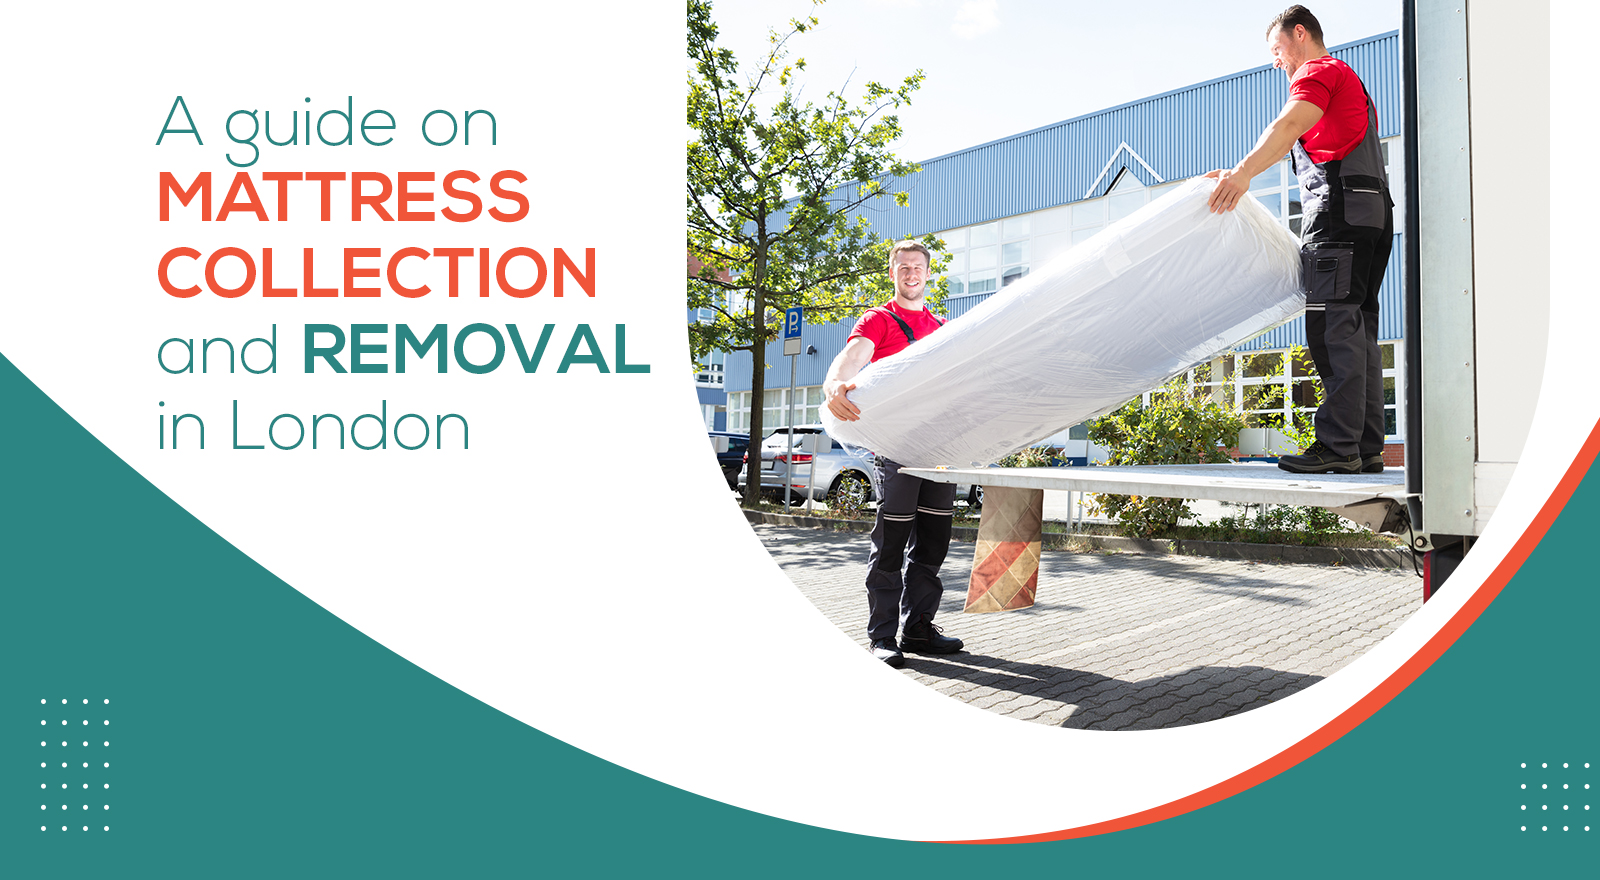 A guide on mattress collection and removal in London